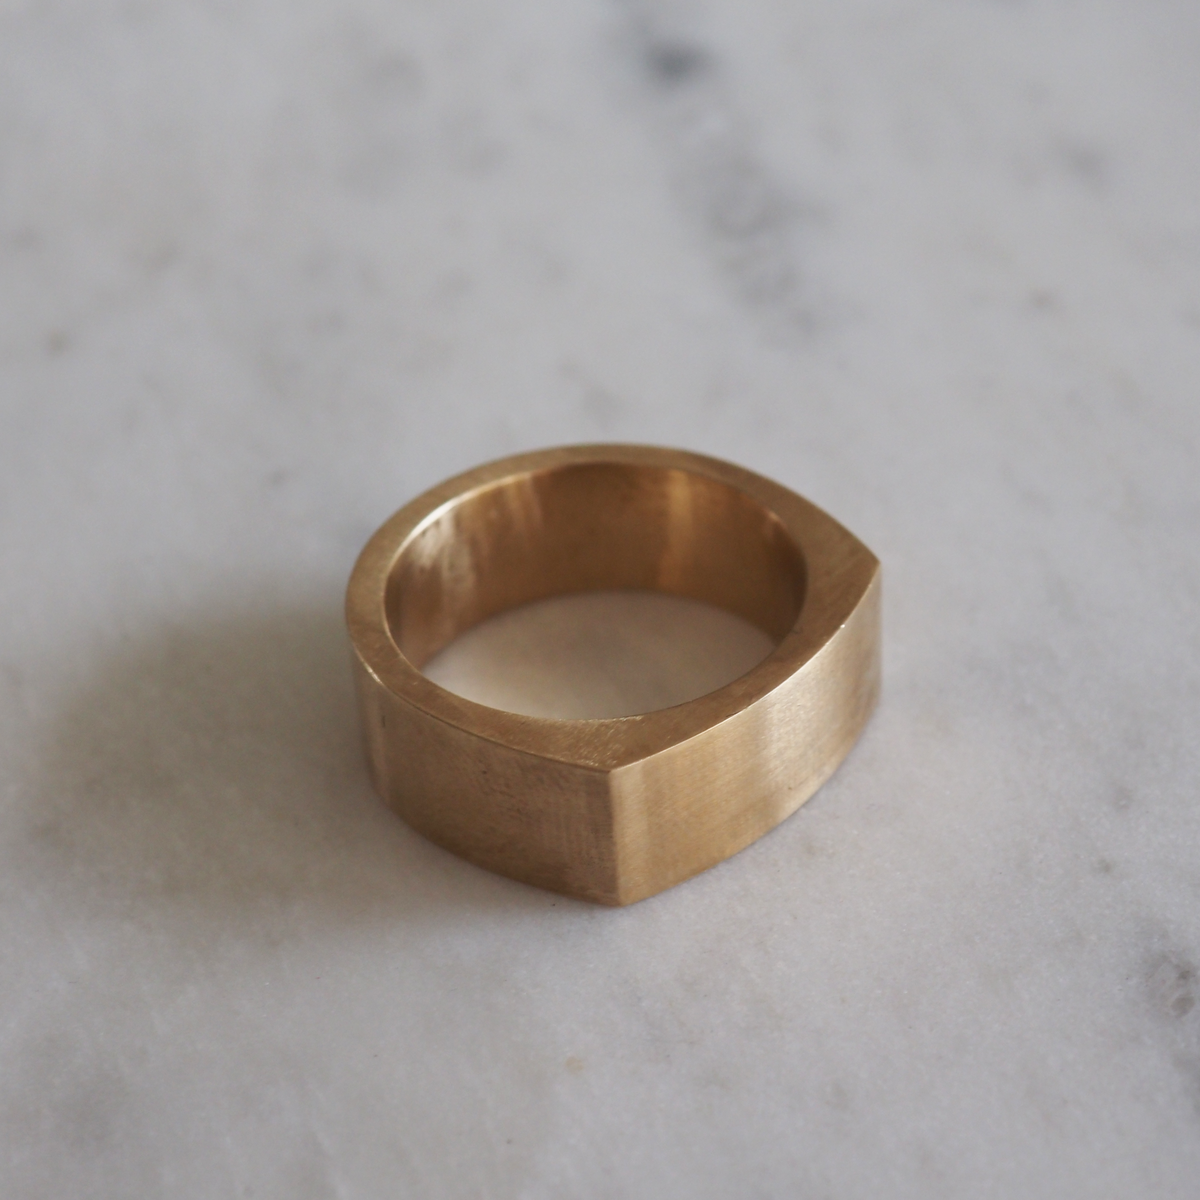 A modern flat top wedding band, designed for comfort and simplicity in 9ct yellow gold 